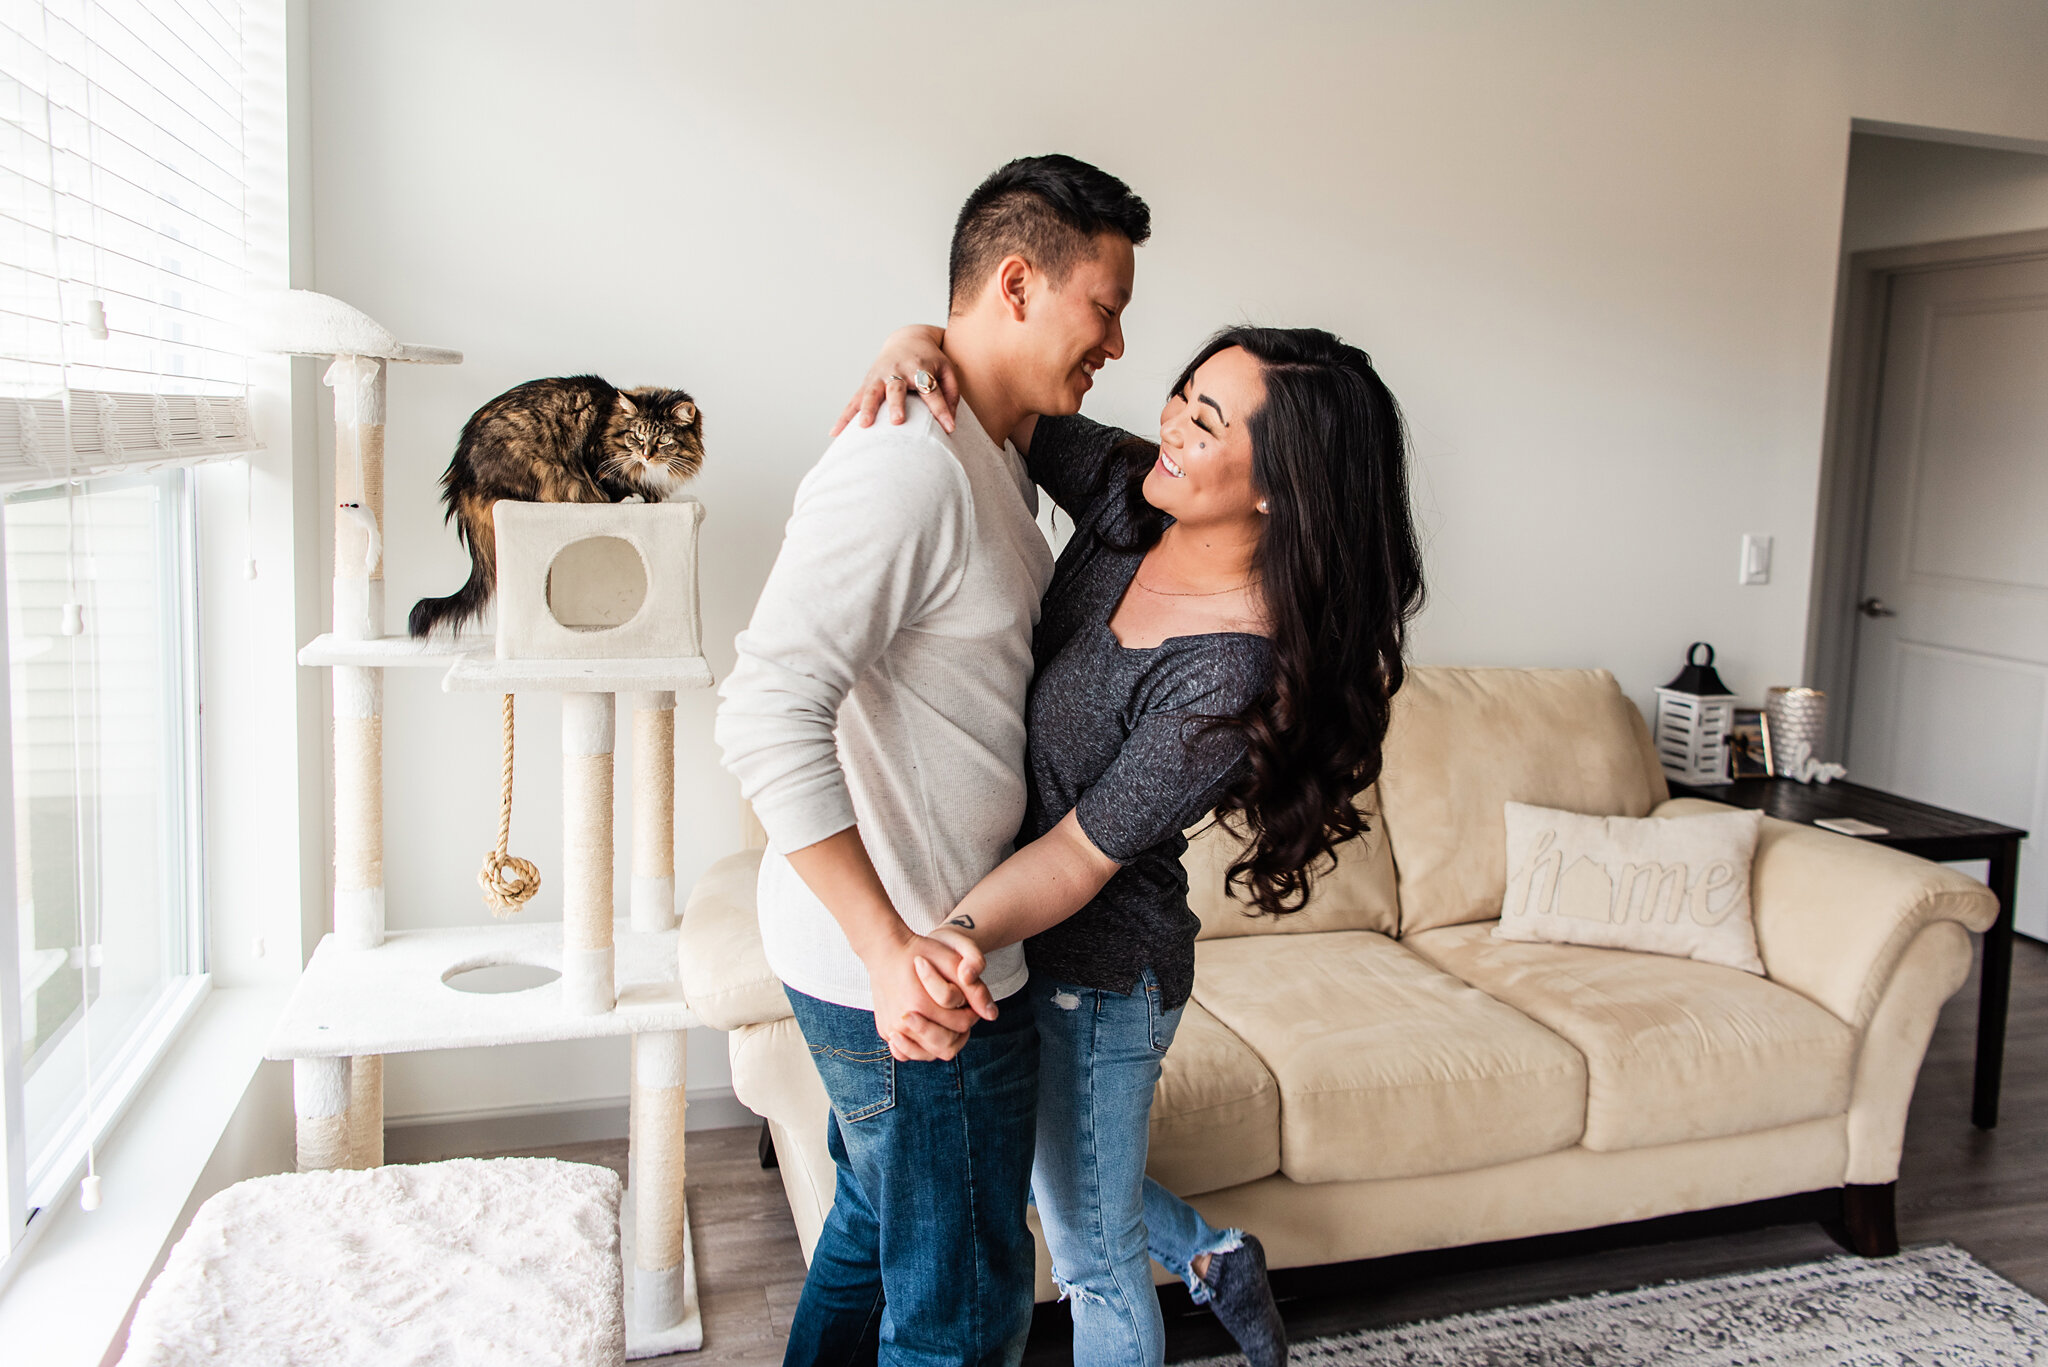 In_Home_Rochester_Couples_Session_JILL_STUDIO_Rochester_NY_Photographer_4142.jpg